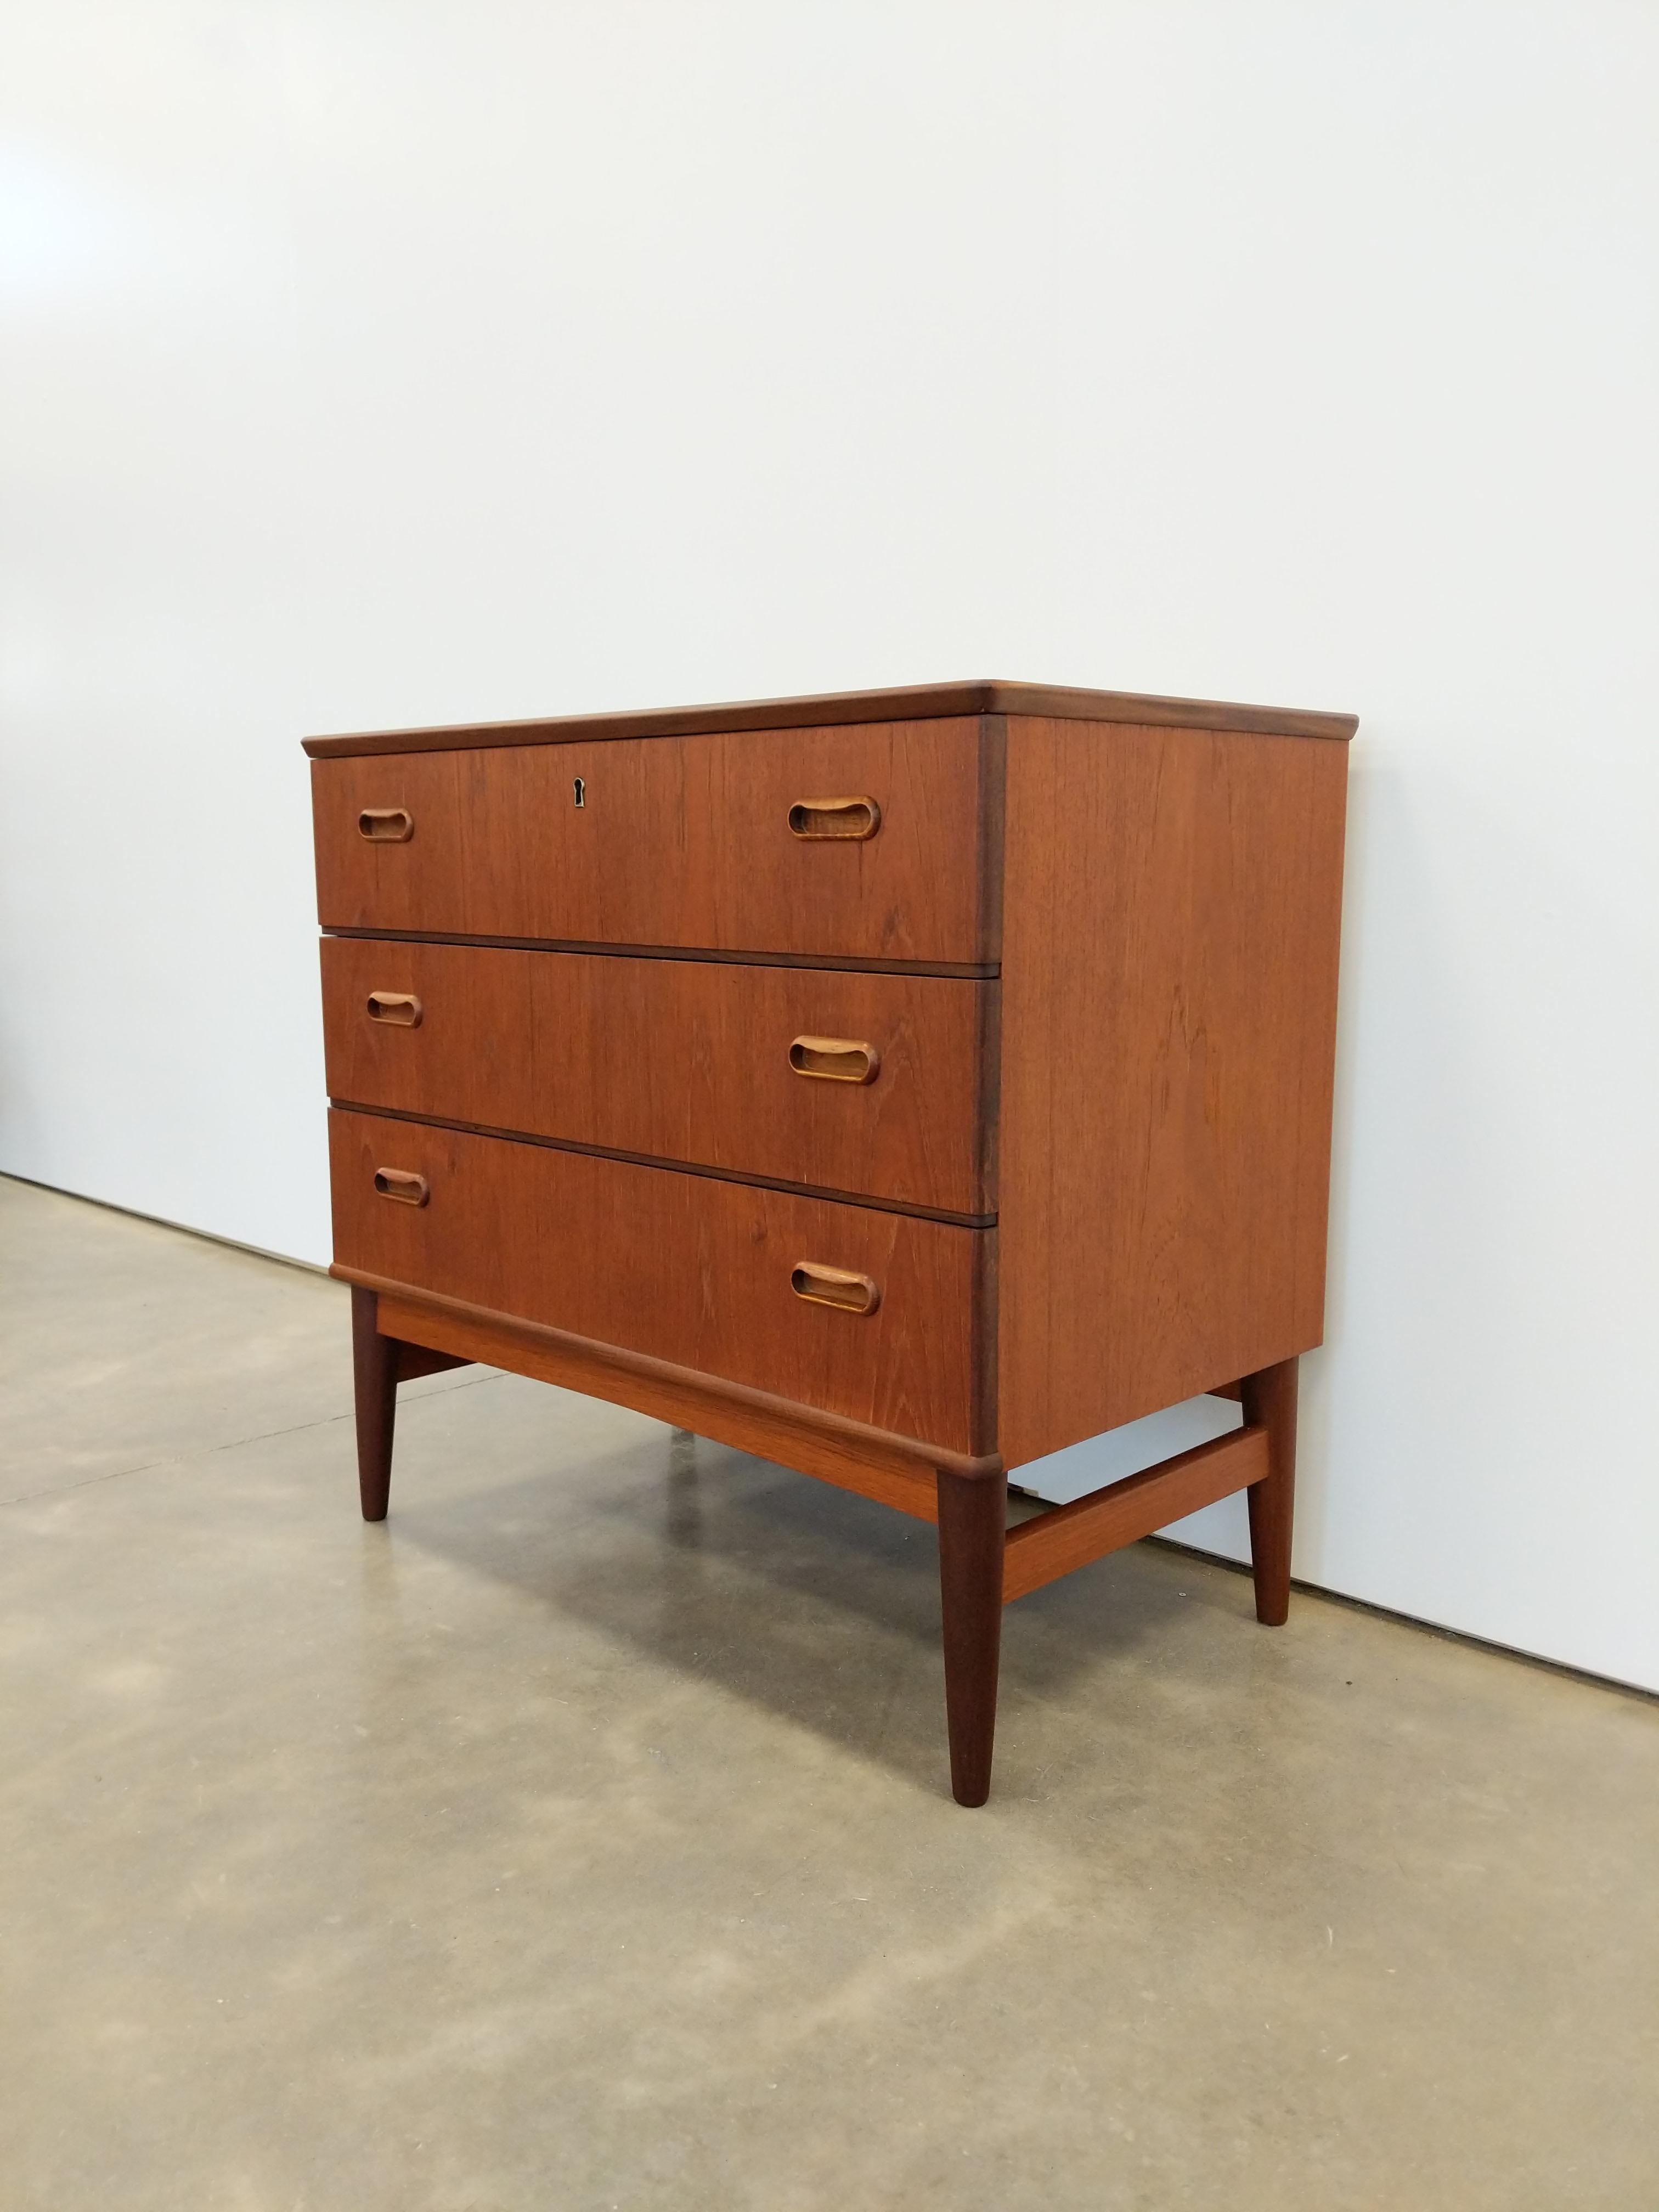 Authentic vintage mid century Danish / Scandinavian Modern teak dresser / chest of drawers.

This piece is in excellent refinished condition with very few signs of age-related wear (see photos).

If you would like any additional details, please